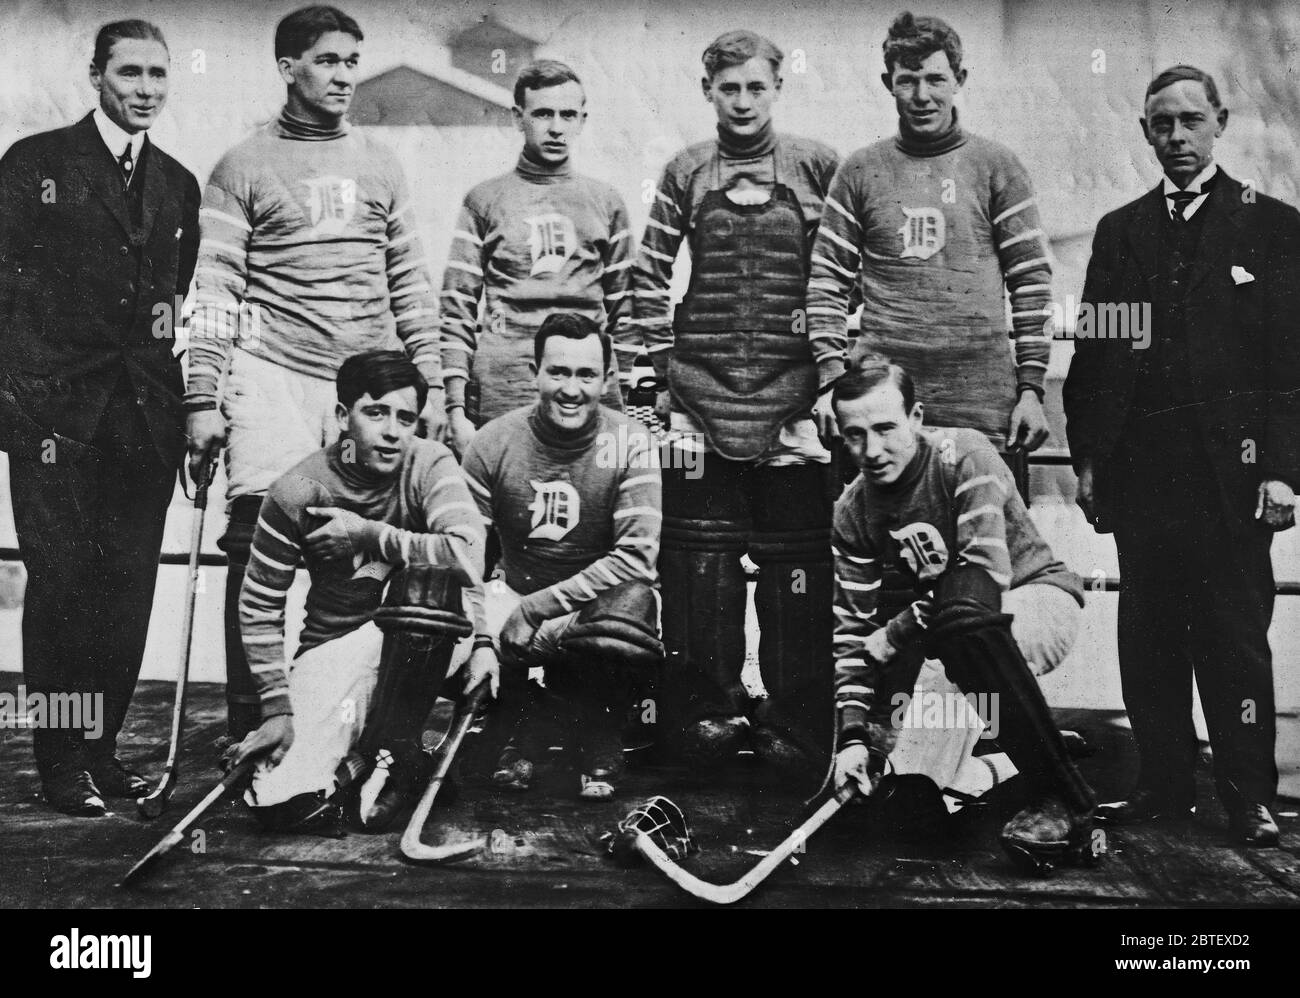 Photograph shows players with roller skates who are members of a roller hockey team. At the turn of the twentieth century roller hockey was also known as roller polo. Stock Photo